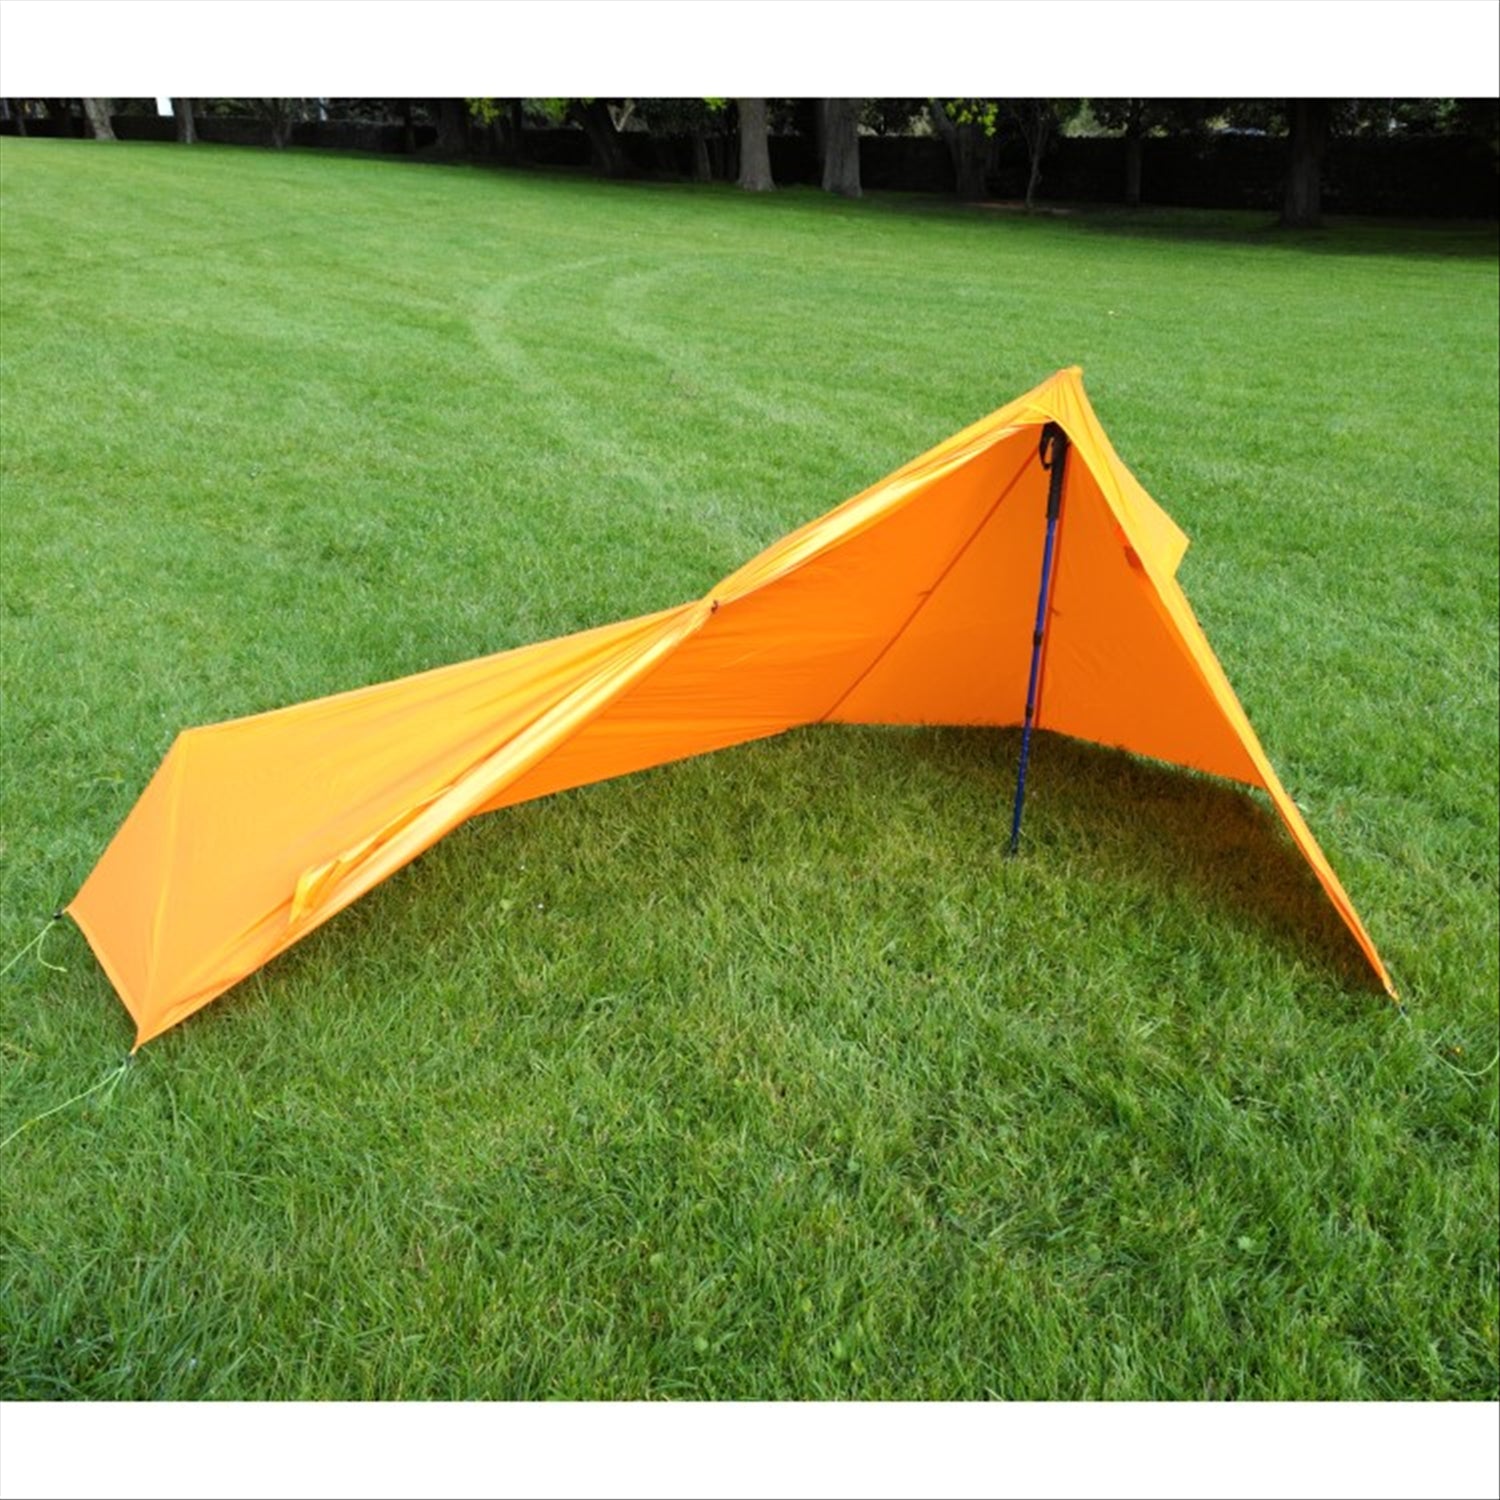 Intents Intents Outdoors Ultrapack DW Fly - Tarp Shelter, 600g 